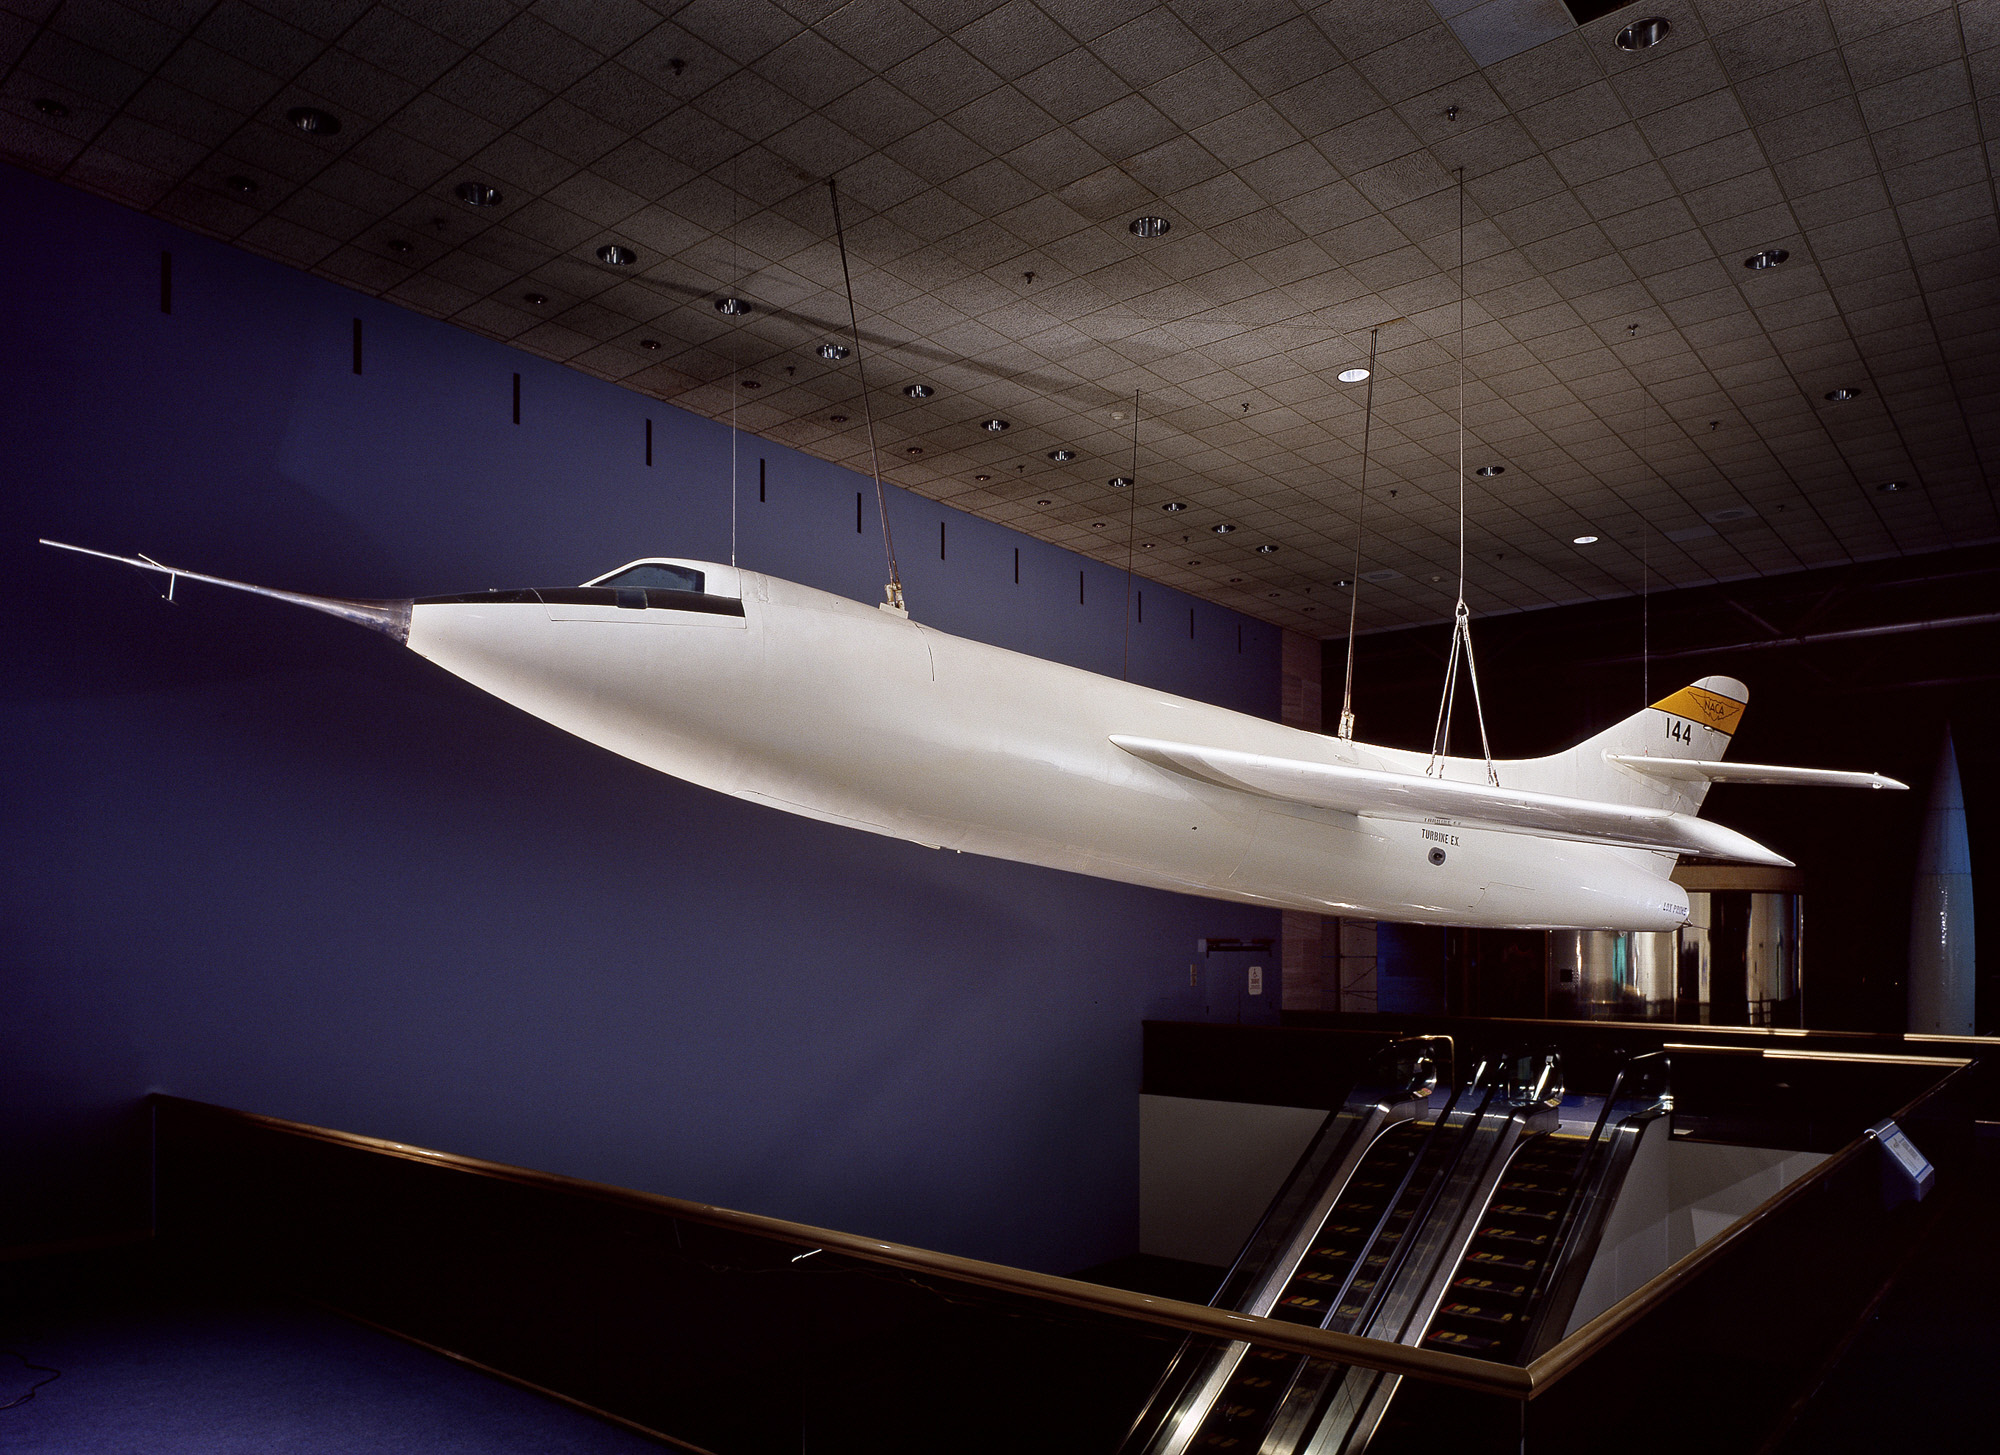 NACA 144, a Douglas D-558-II Skyrocket, on display at the National Mall Building, Smithsonian Institution. (NASM)